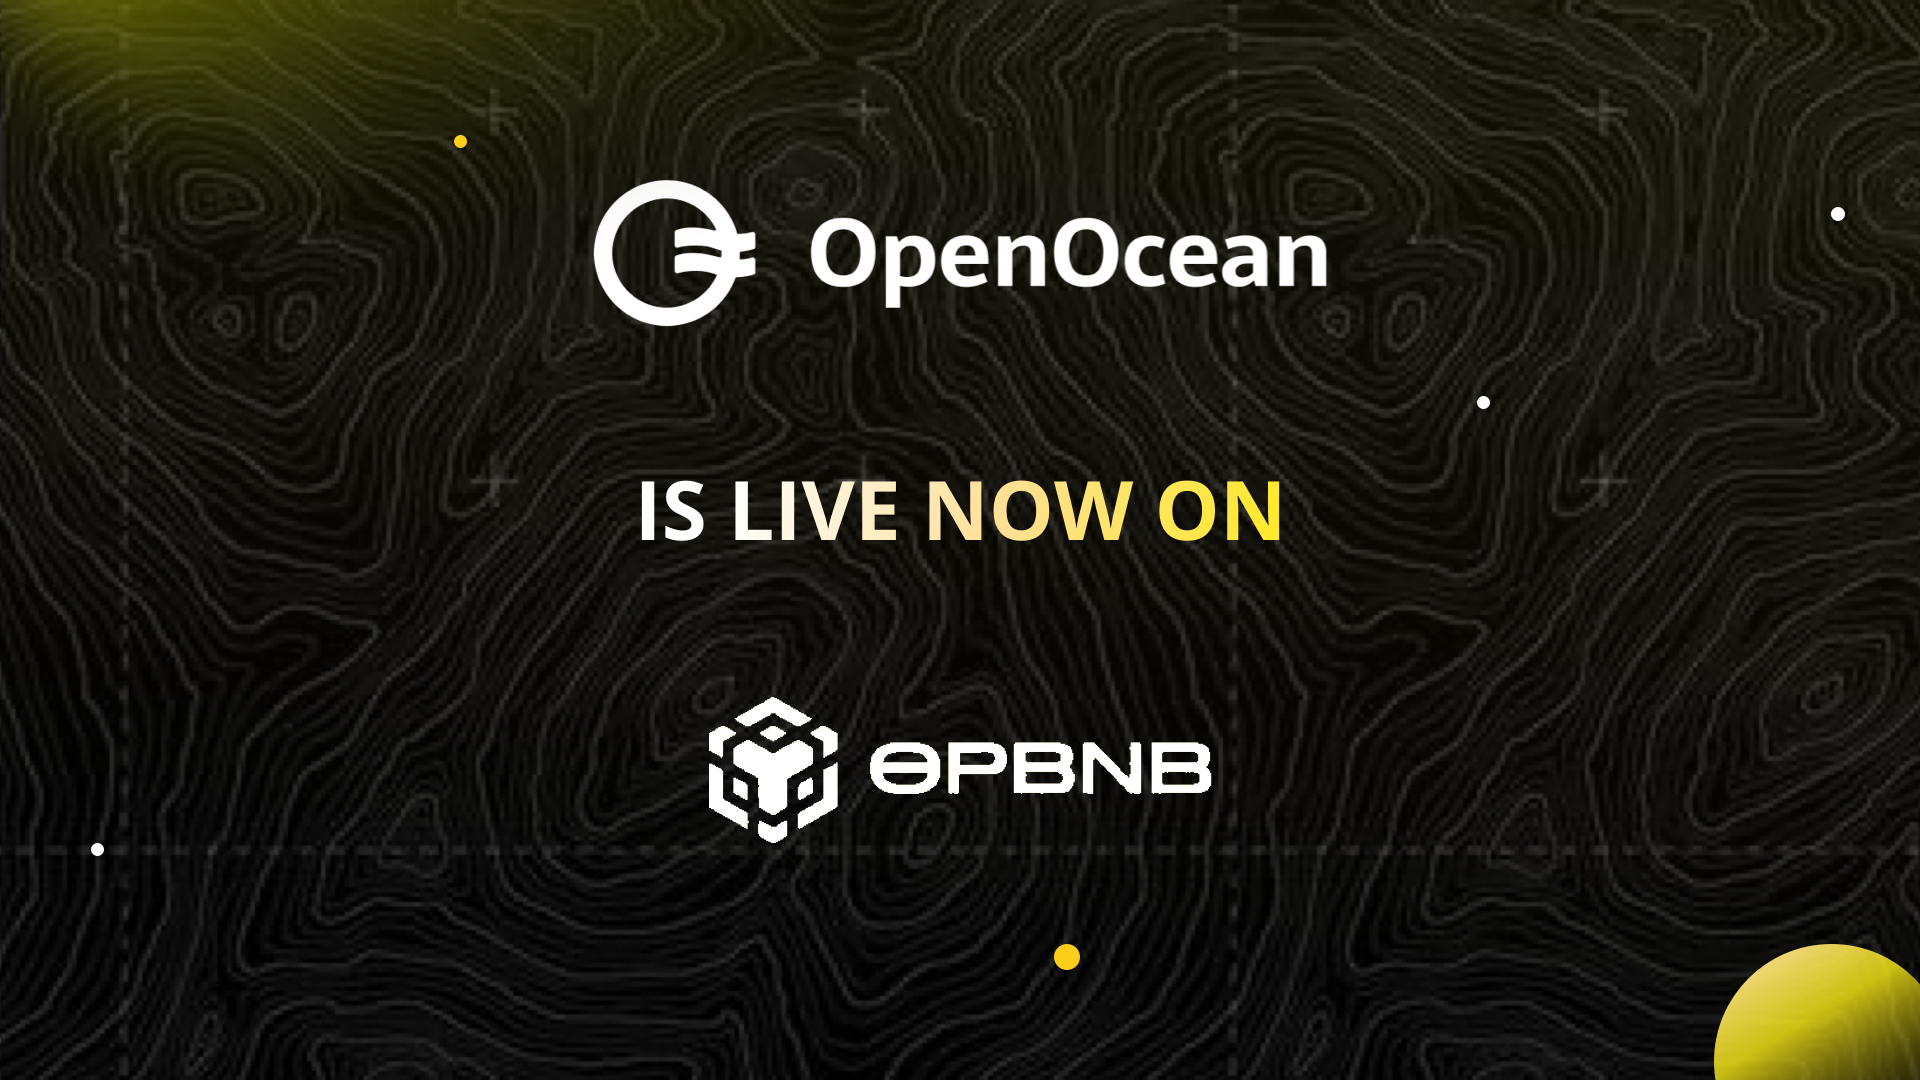 OpenOcean now supports opBNB, an optimistic Layer-2 Scaling Solution to BNB chain